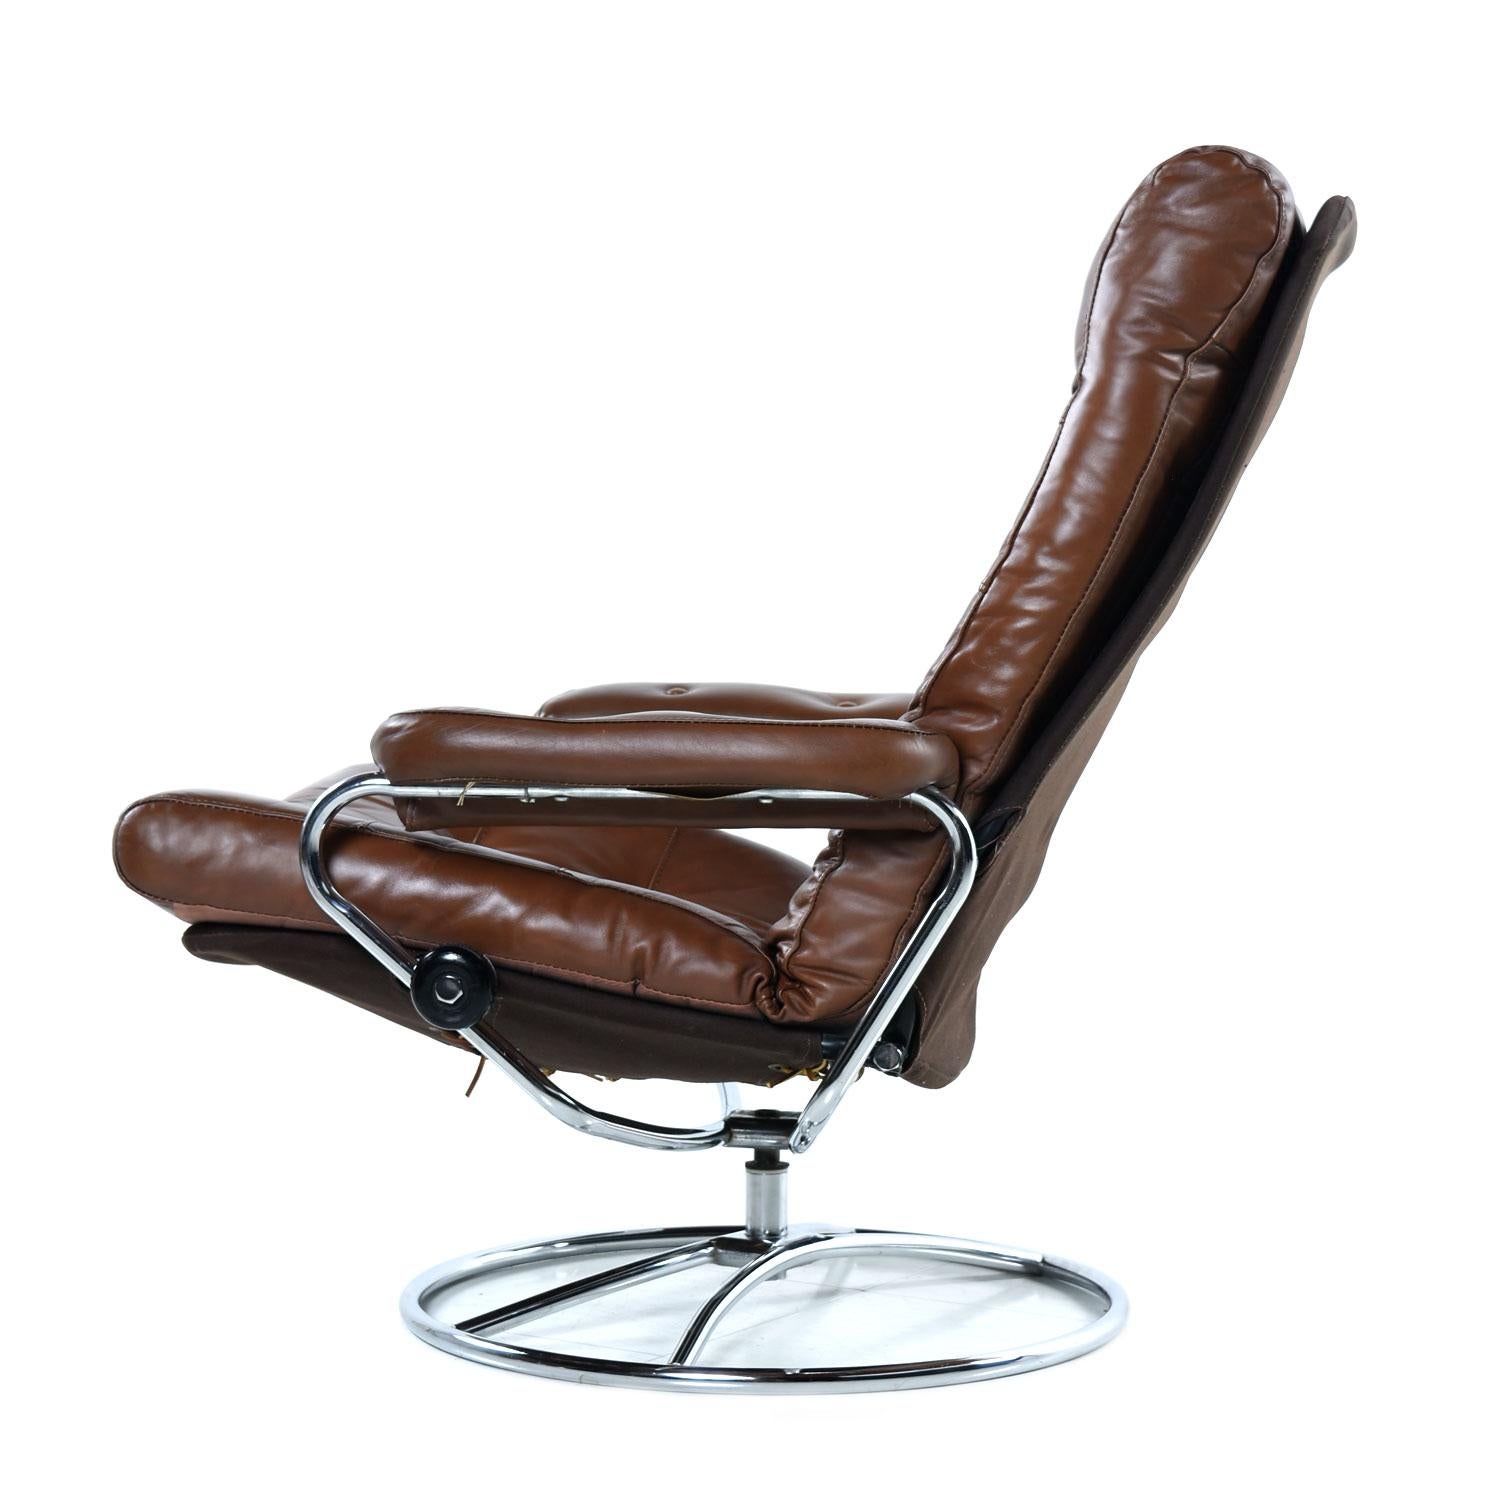 vintage leather recliner chair